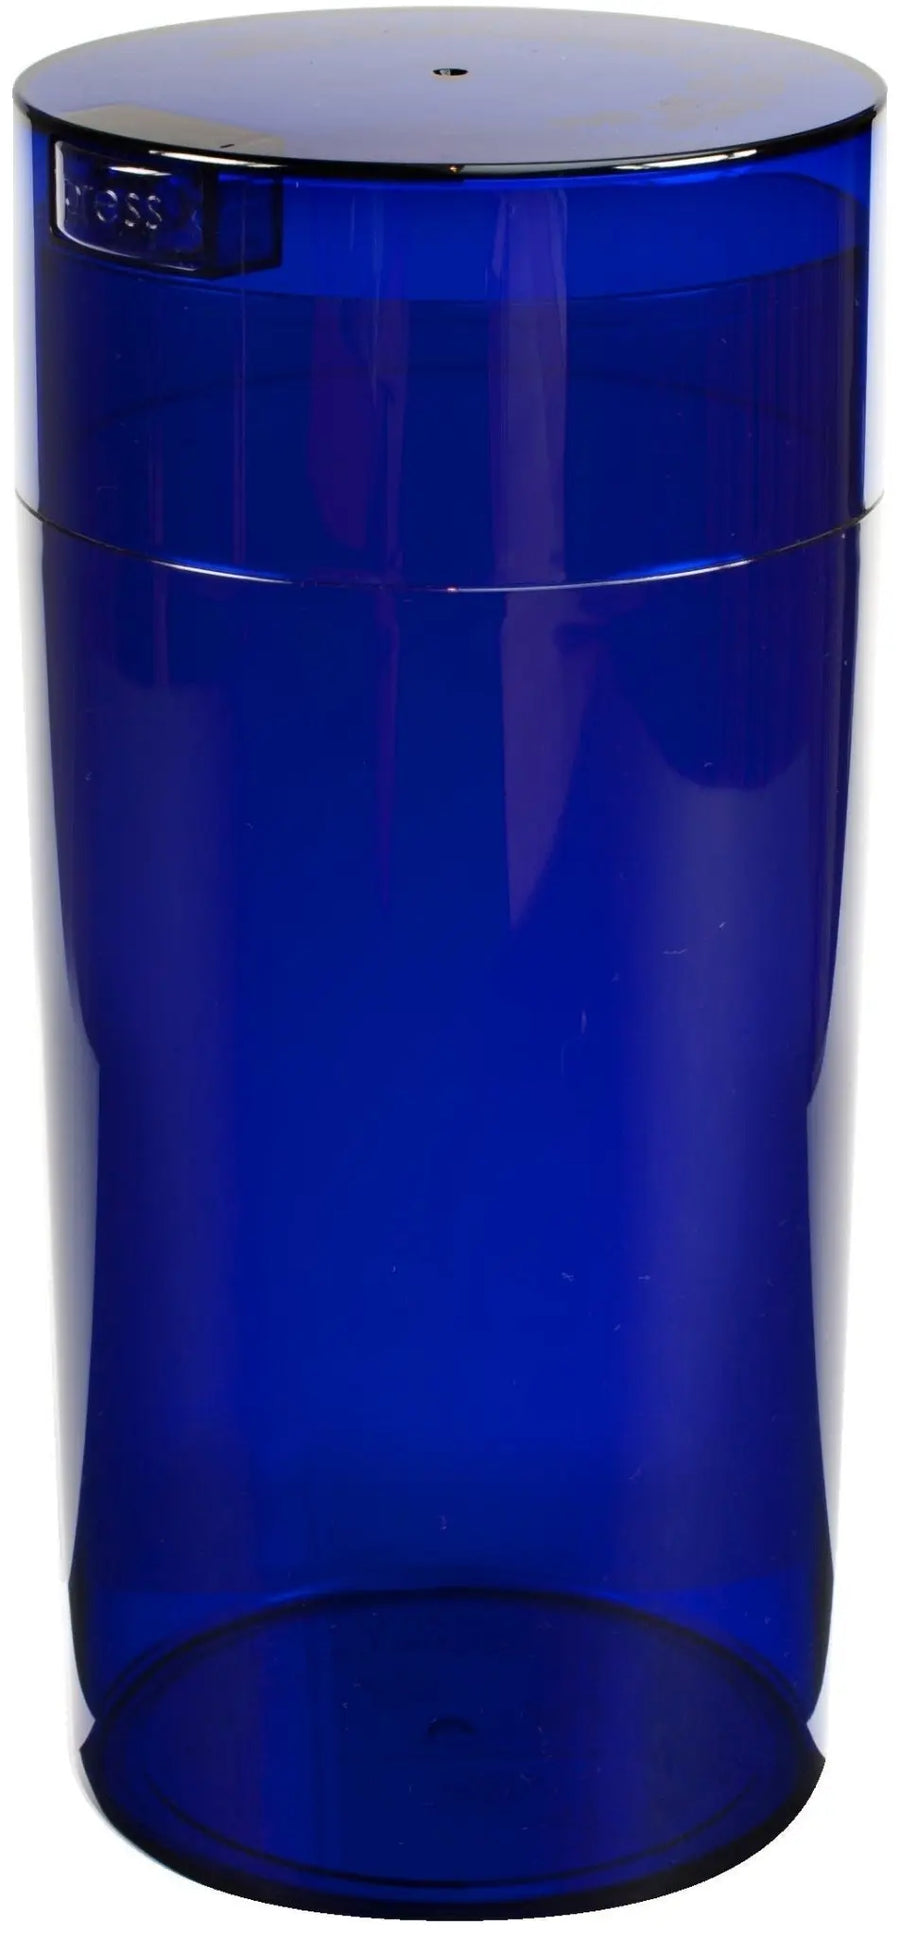 Tightvac 2,35 liter / 680g / Clear / Blue Tint - TightVac Europe - The eassiest storage solutions